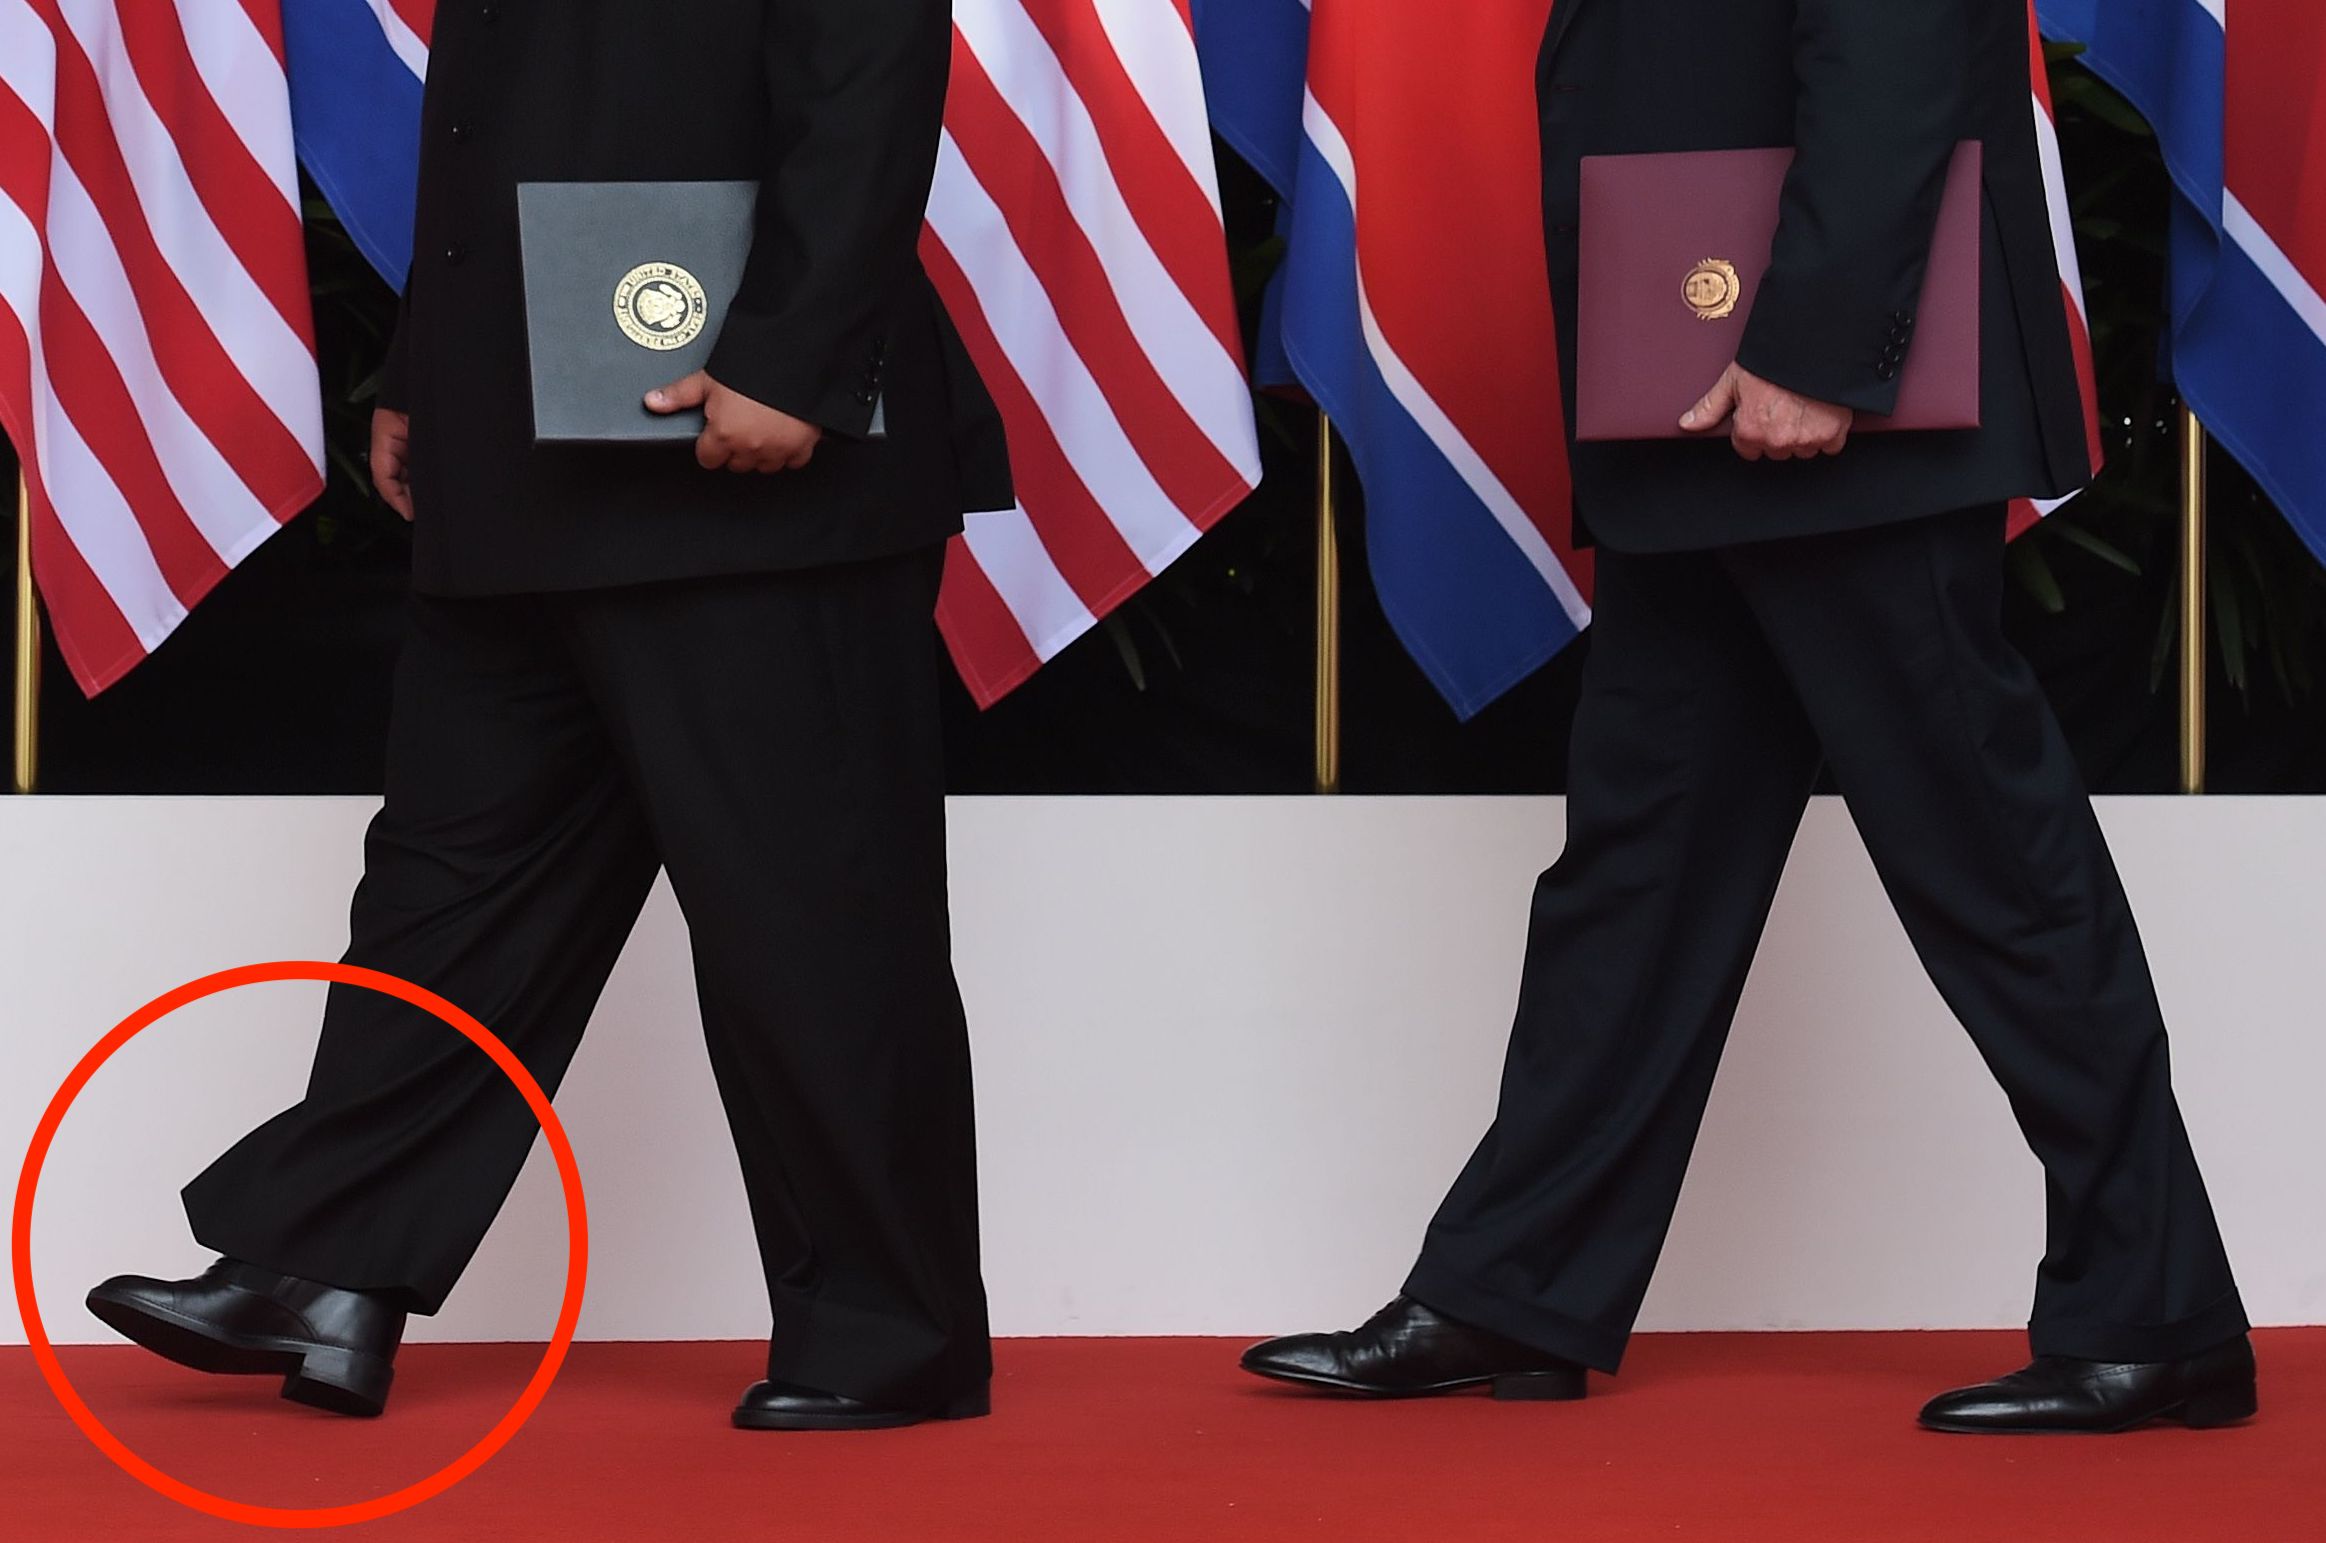 US President Donald Trump (R) poses with North Korea's leader Kim Jong Un focus on shoes